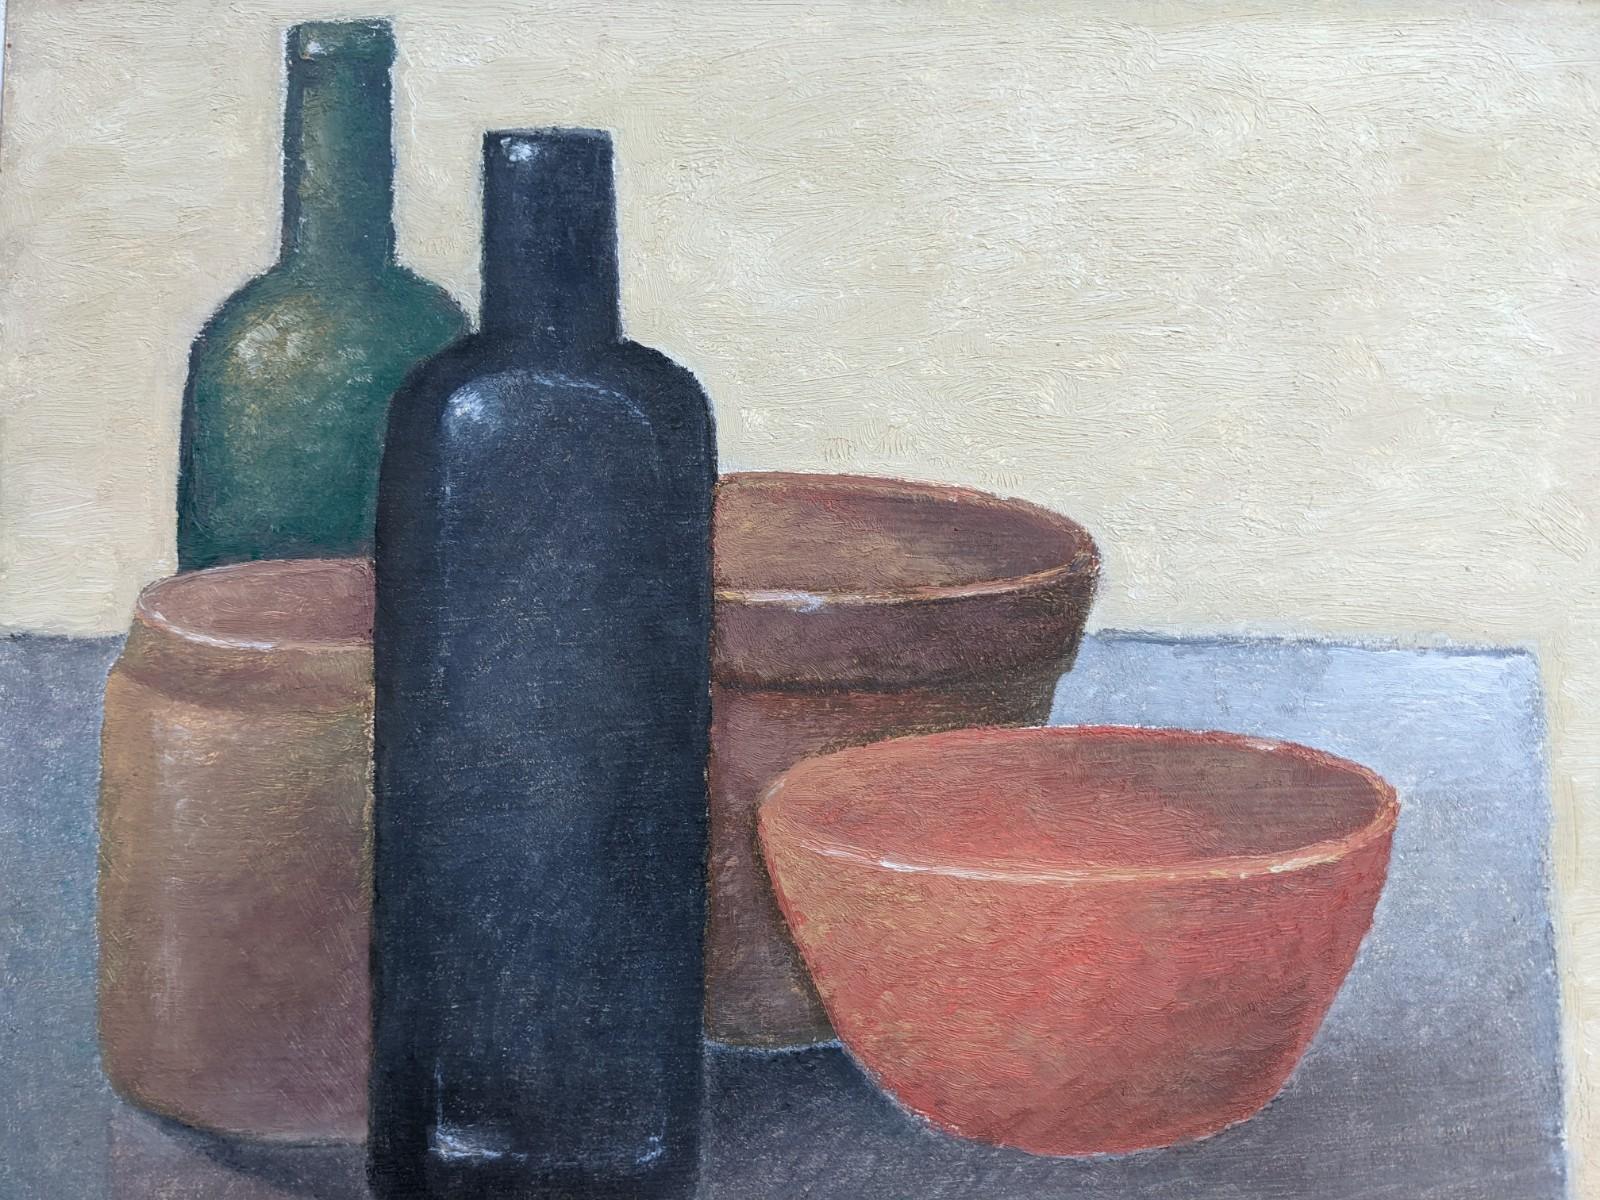 BOWLS & BOTTLES
Size: 34 x 43 cm (including frame)
Oil on Board

A seemingly simple yet very effective still life in oil, painted onto board and dated 1986.

This well-balanced still life is one that is very satisfying to look at. Two bottles and